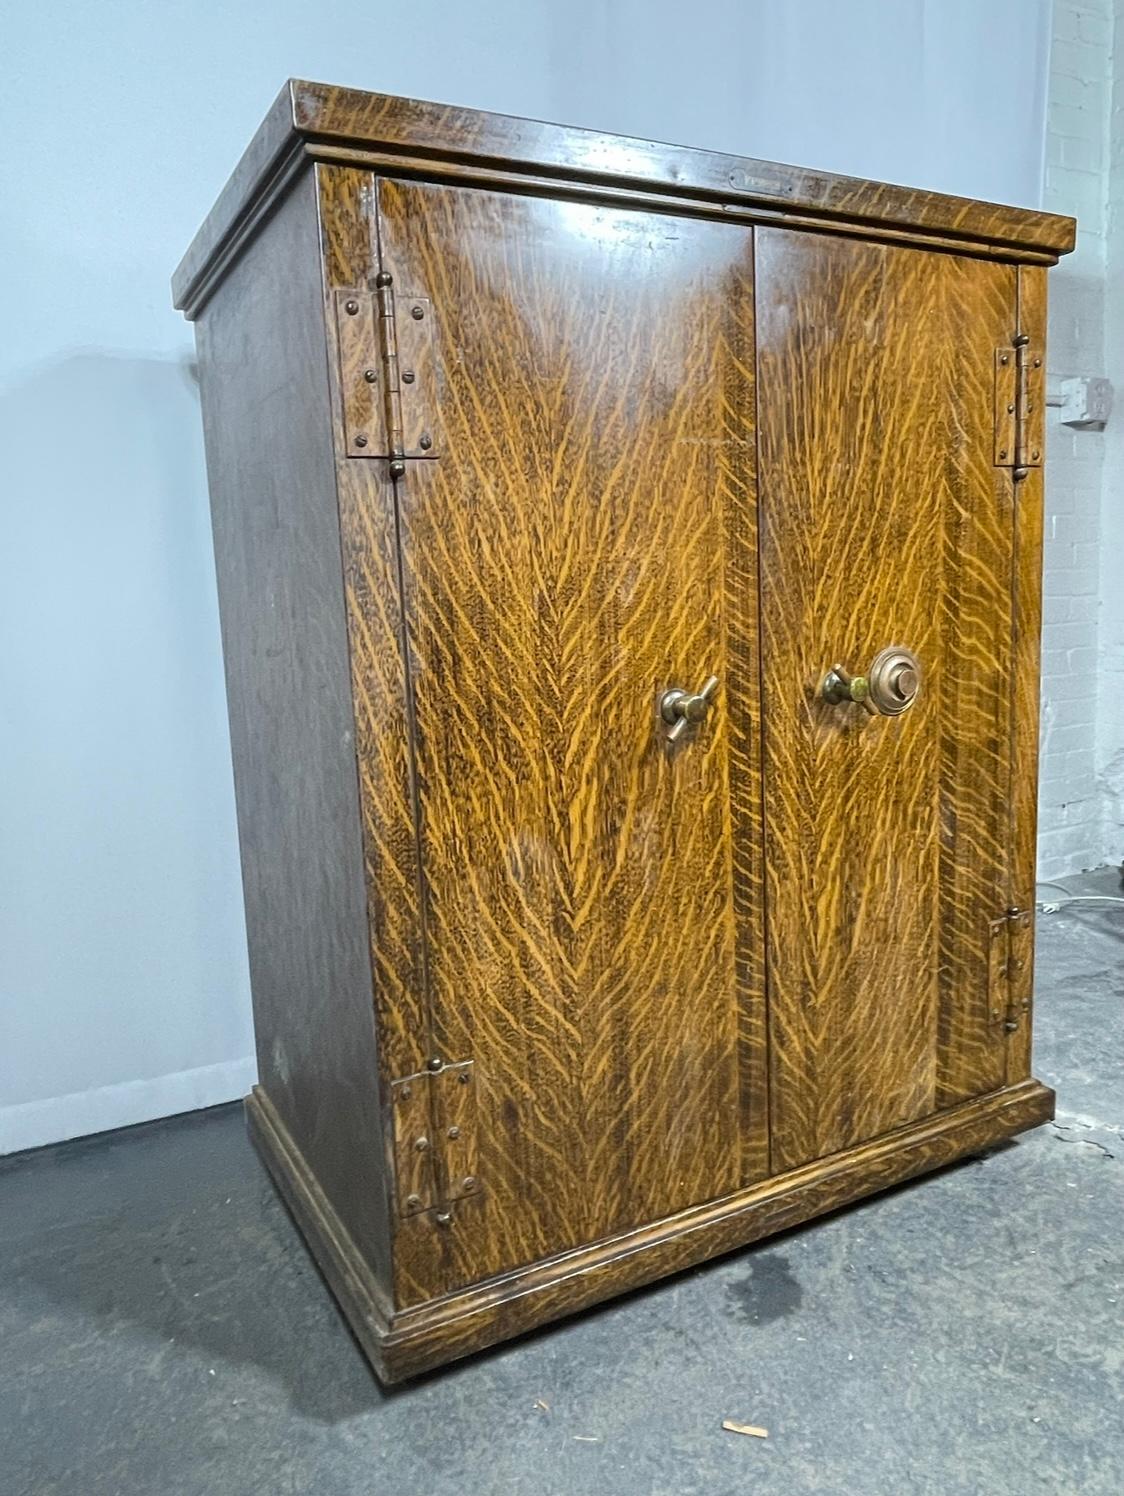 Large Industrial  Faux Wood Grain Metal Safe, dry bar, storage  In Good Condition For Sale In Buffalo, NY